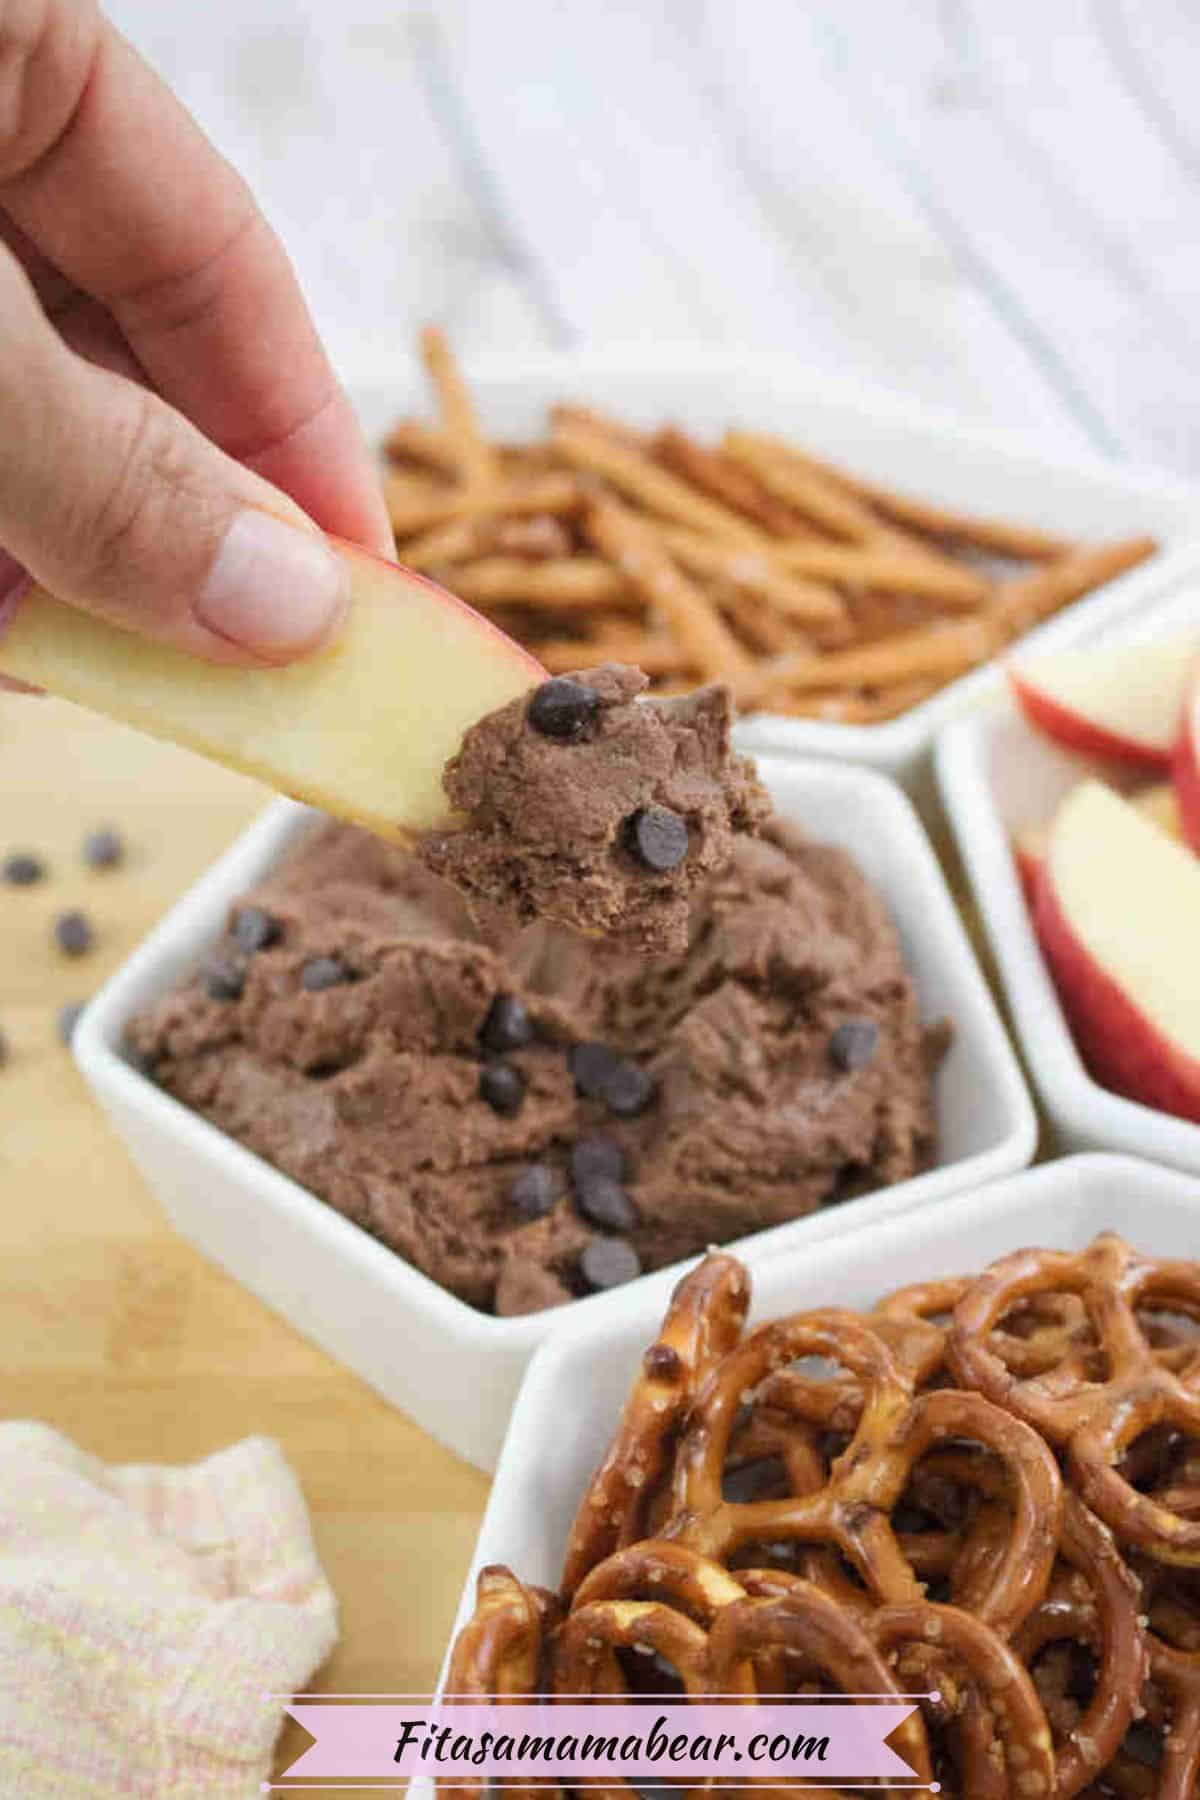 An apple slice being dipped into high protein edible brownie batter topped with chocolate chips in a white ramekin with more pretzels and apple slices around it.